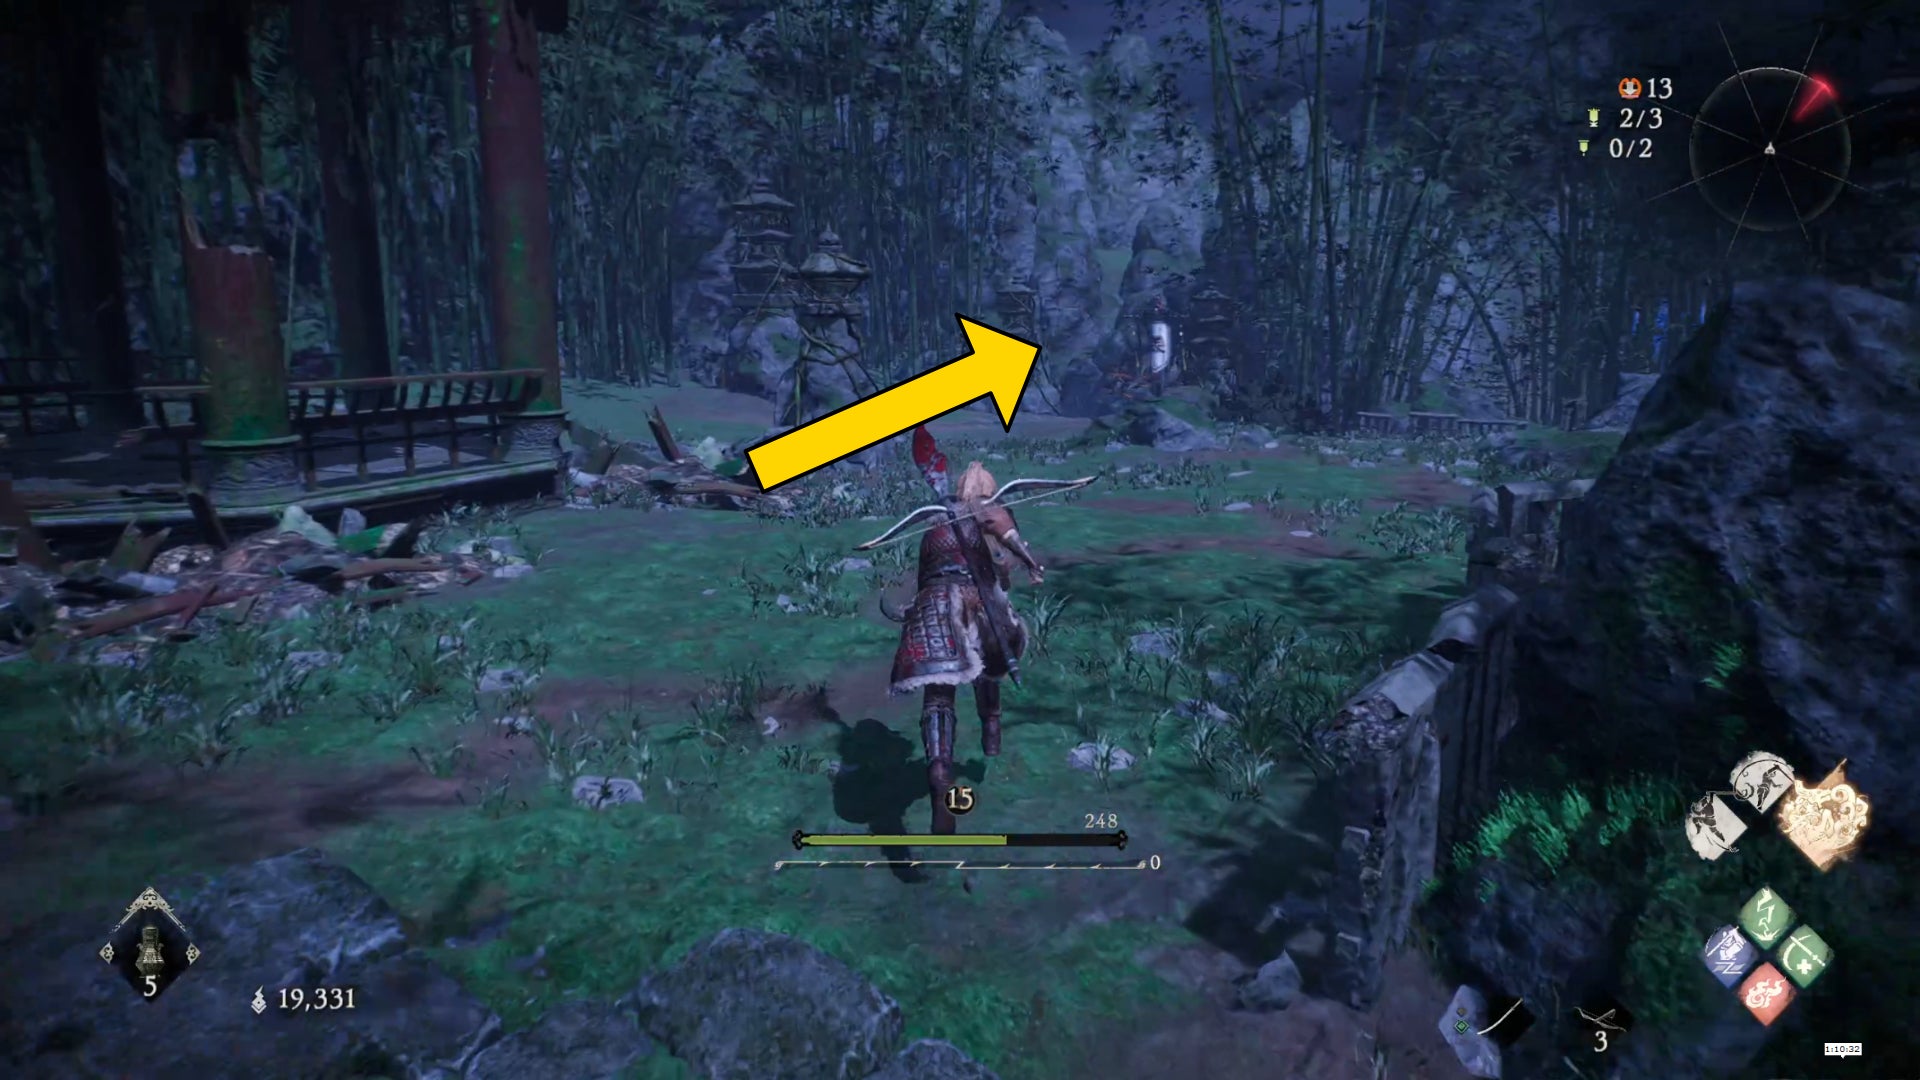 The player in Wo Long runs past a gazebo and down a path next to a Battle Flag.